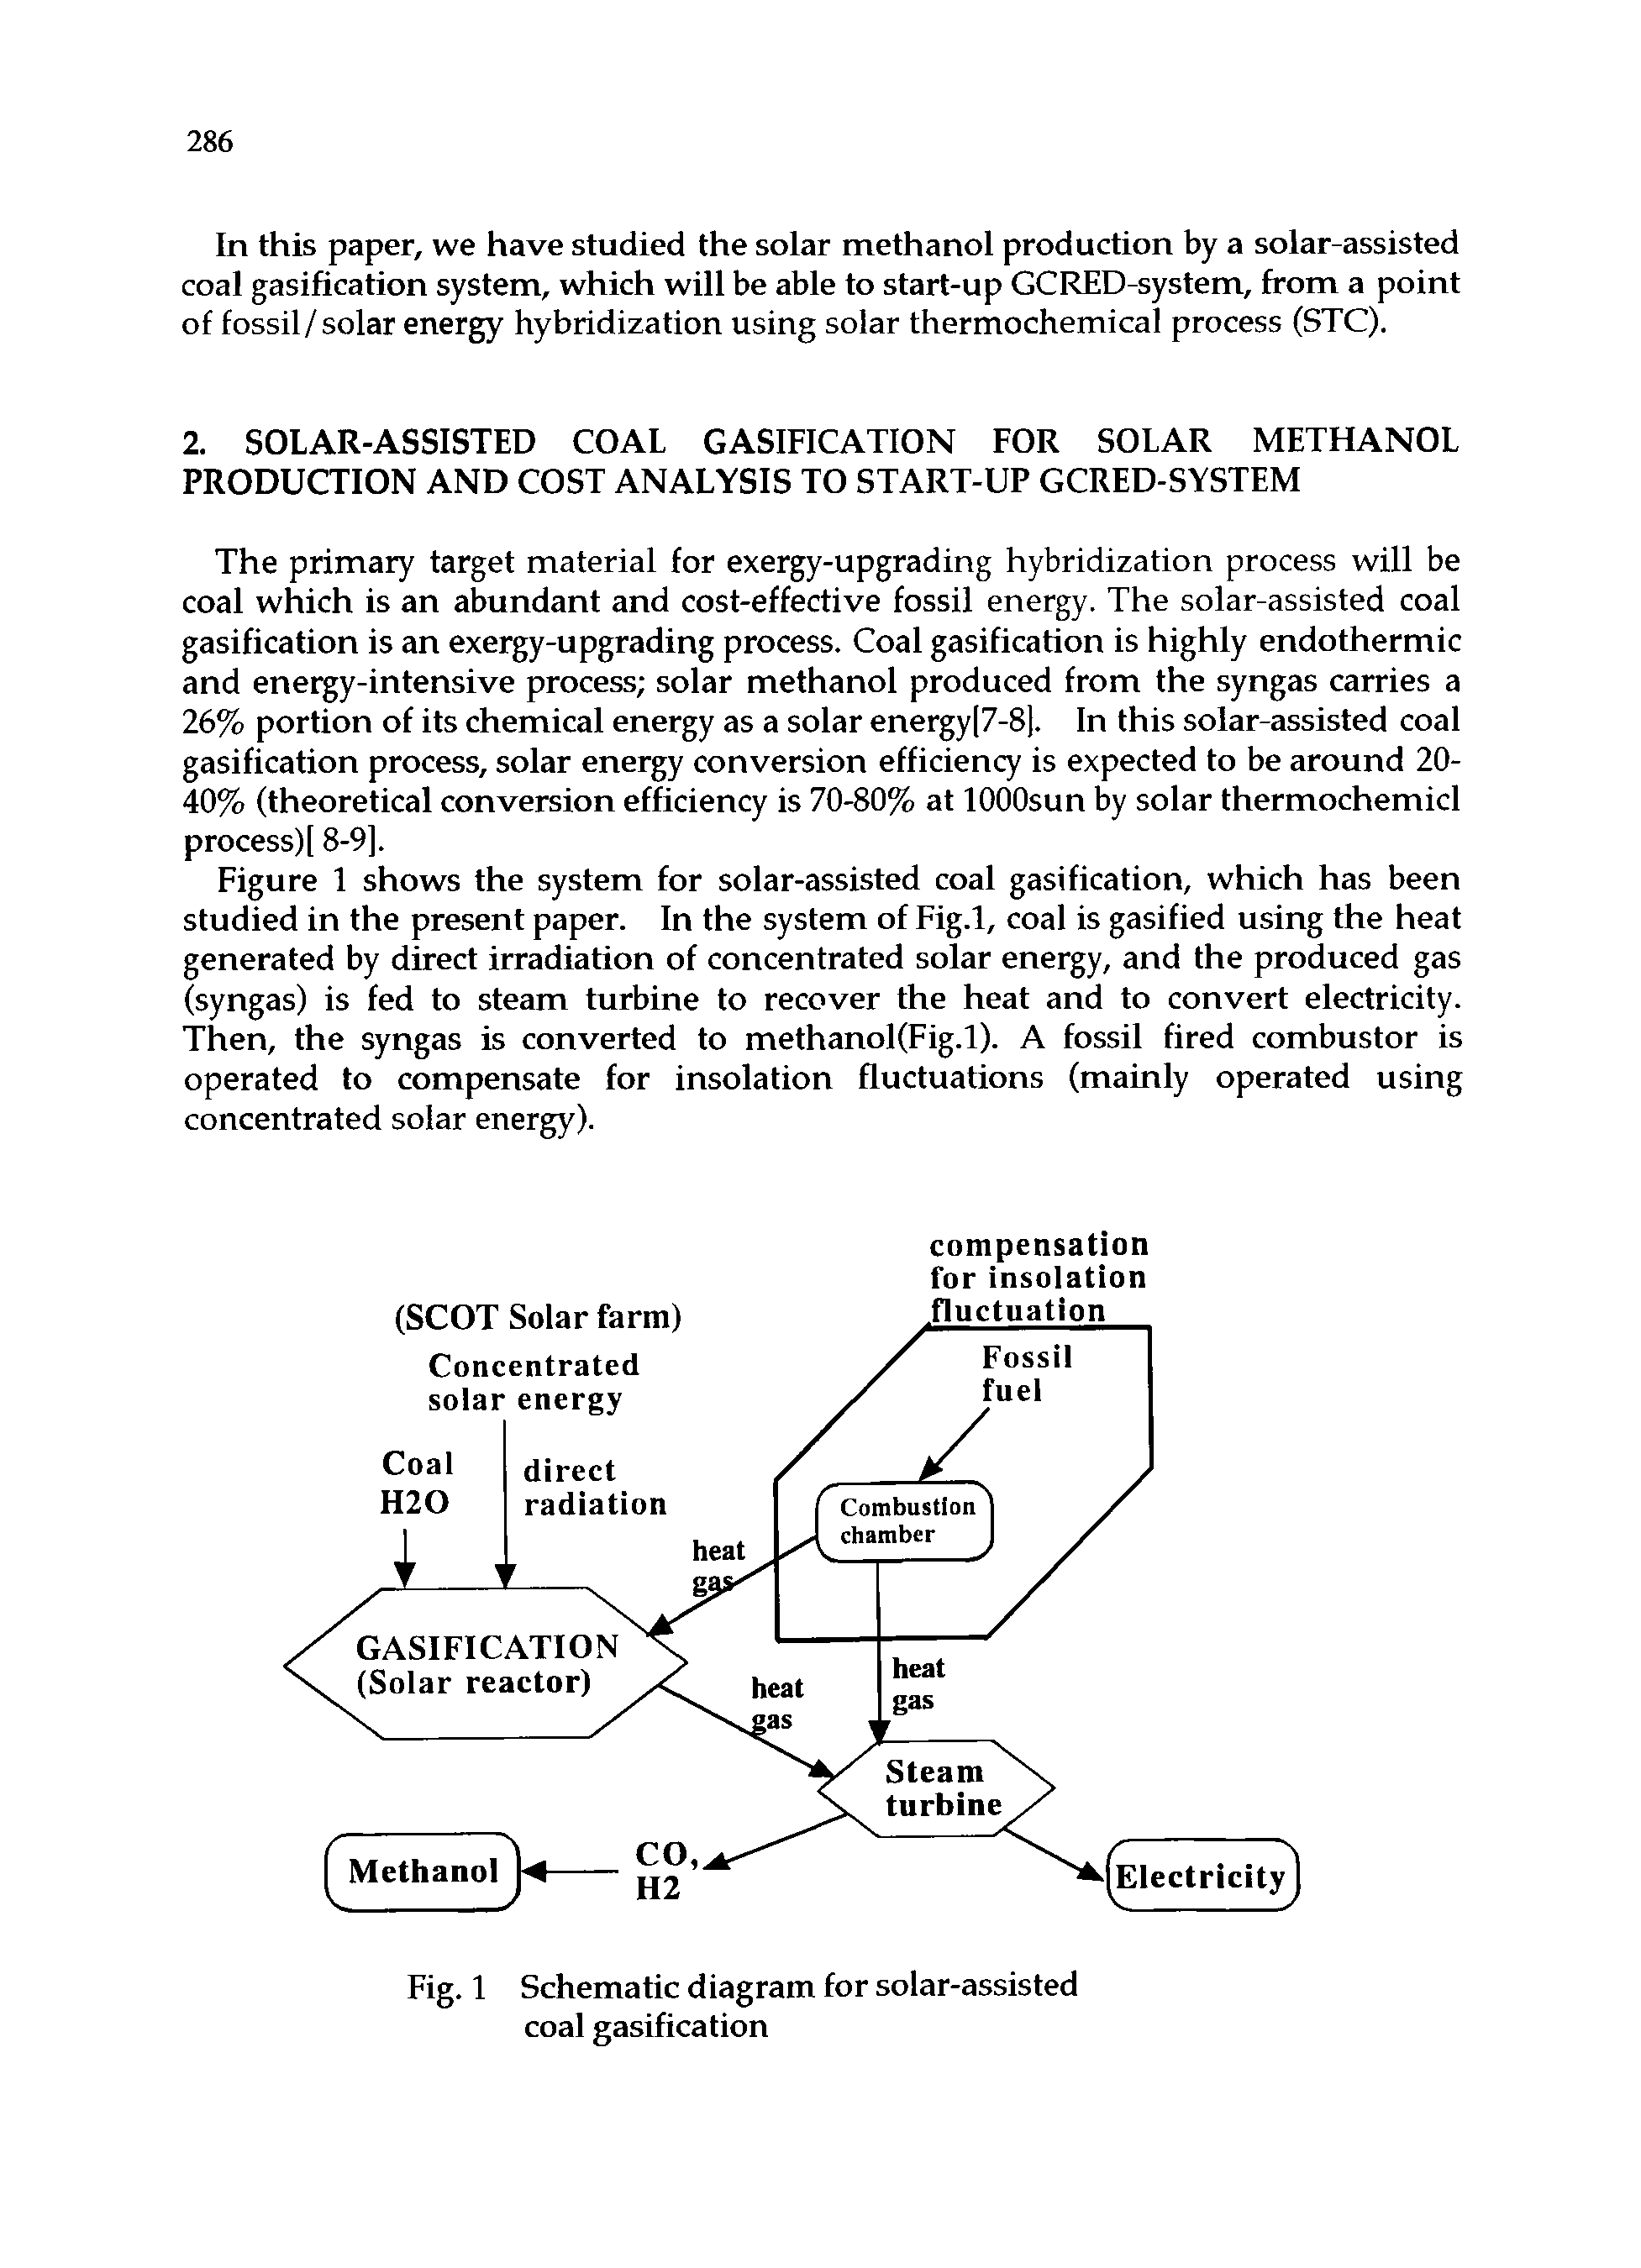 Fig. 1 Schematic diagram for solar-assisted coal gasification...